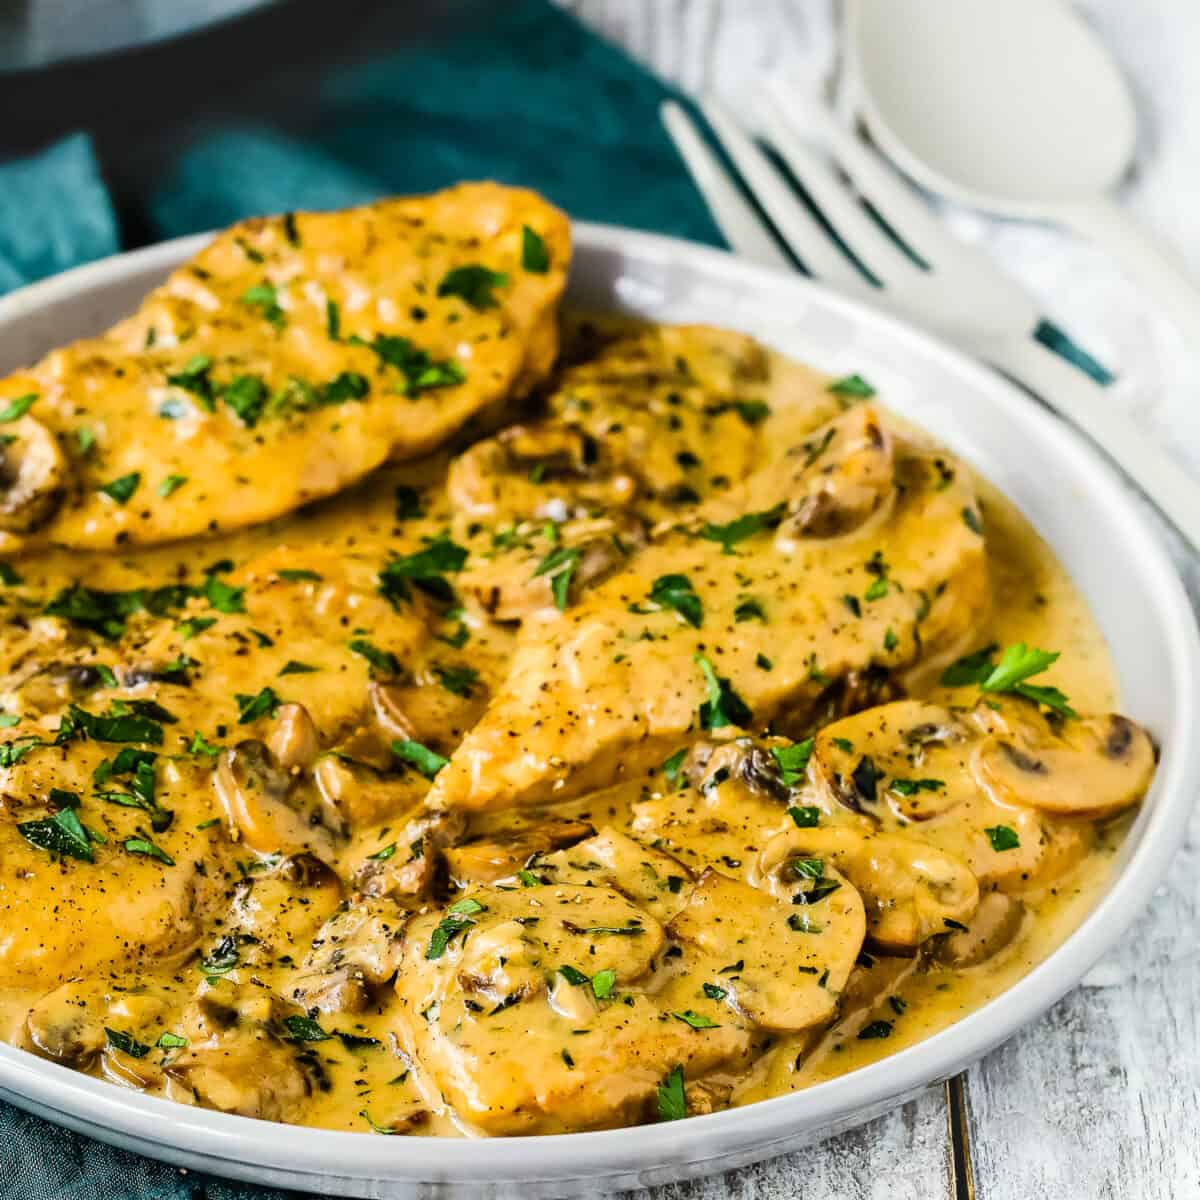 Easy Chicken Marsala (Instant Pot & Stovetop) - Mommy's Home Cooking